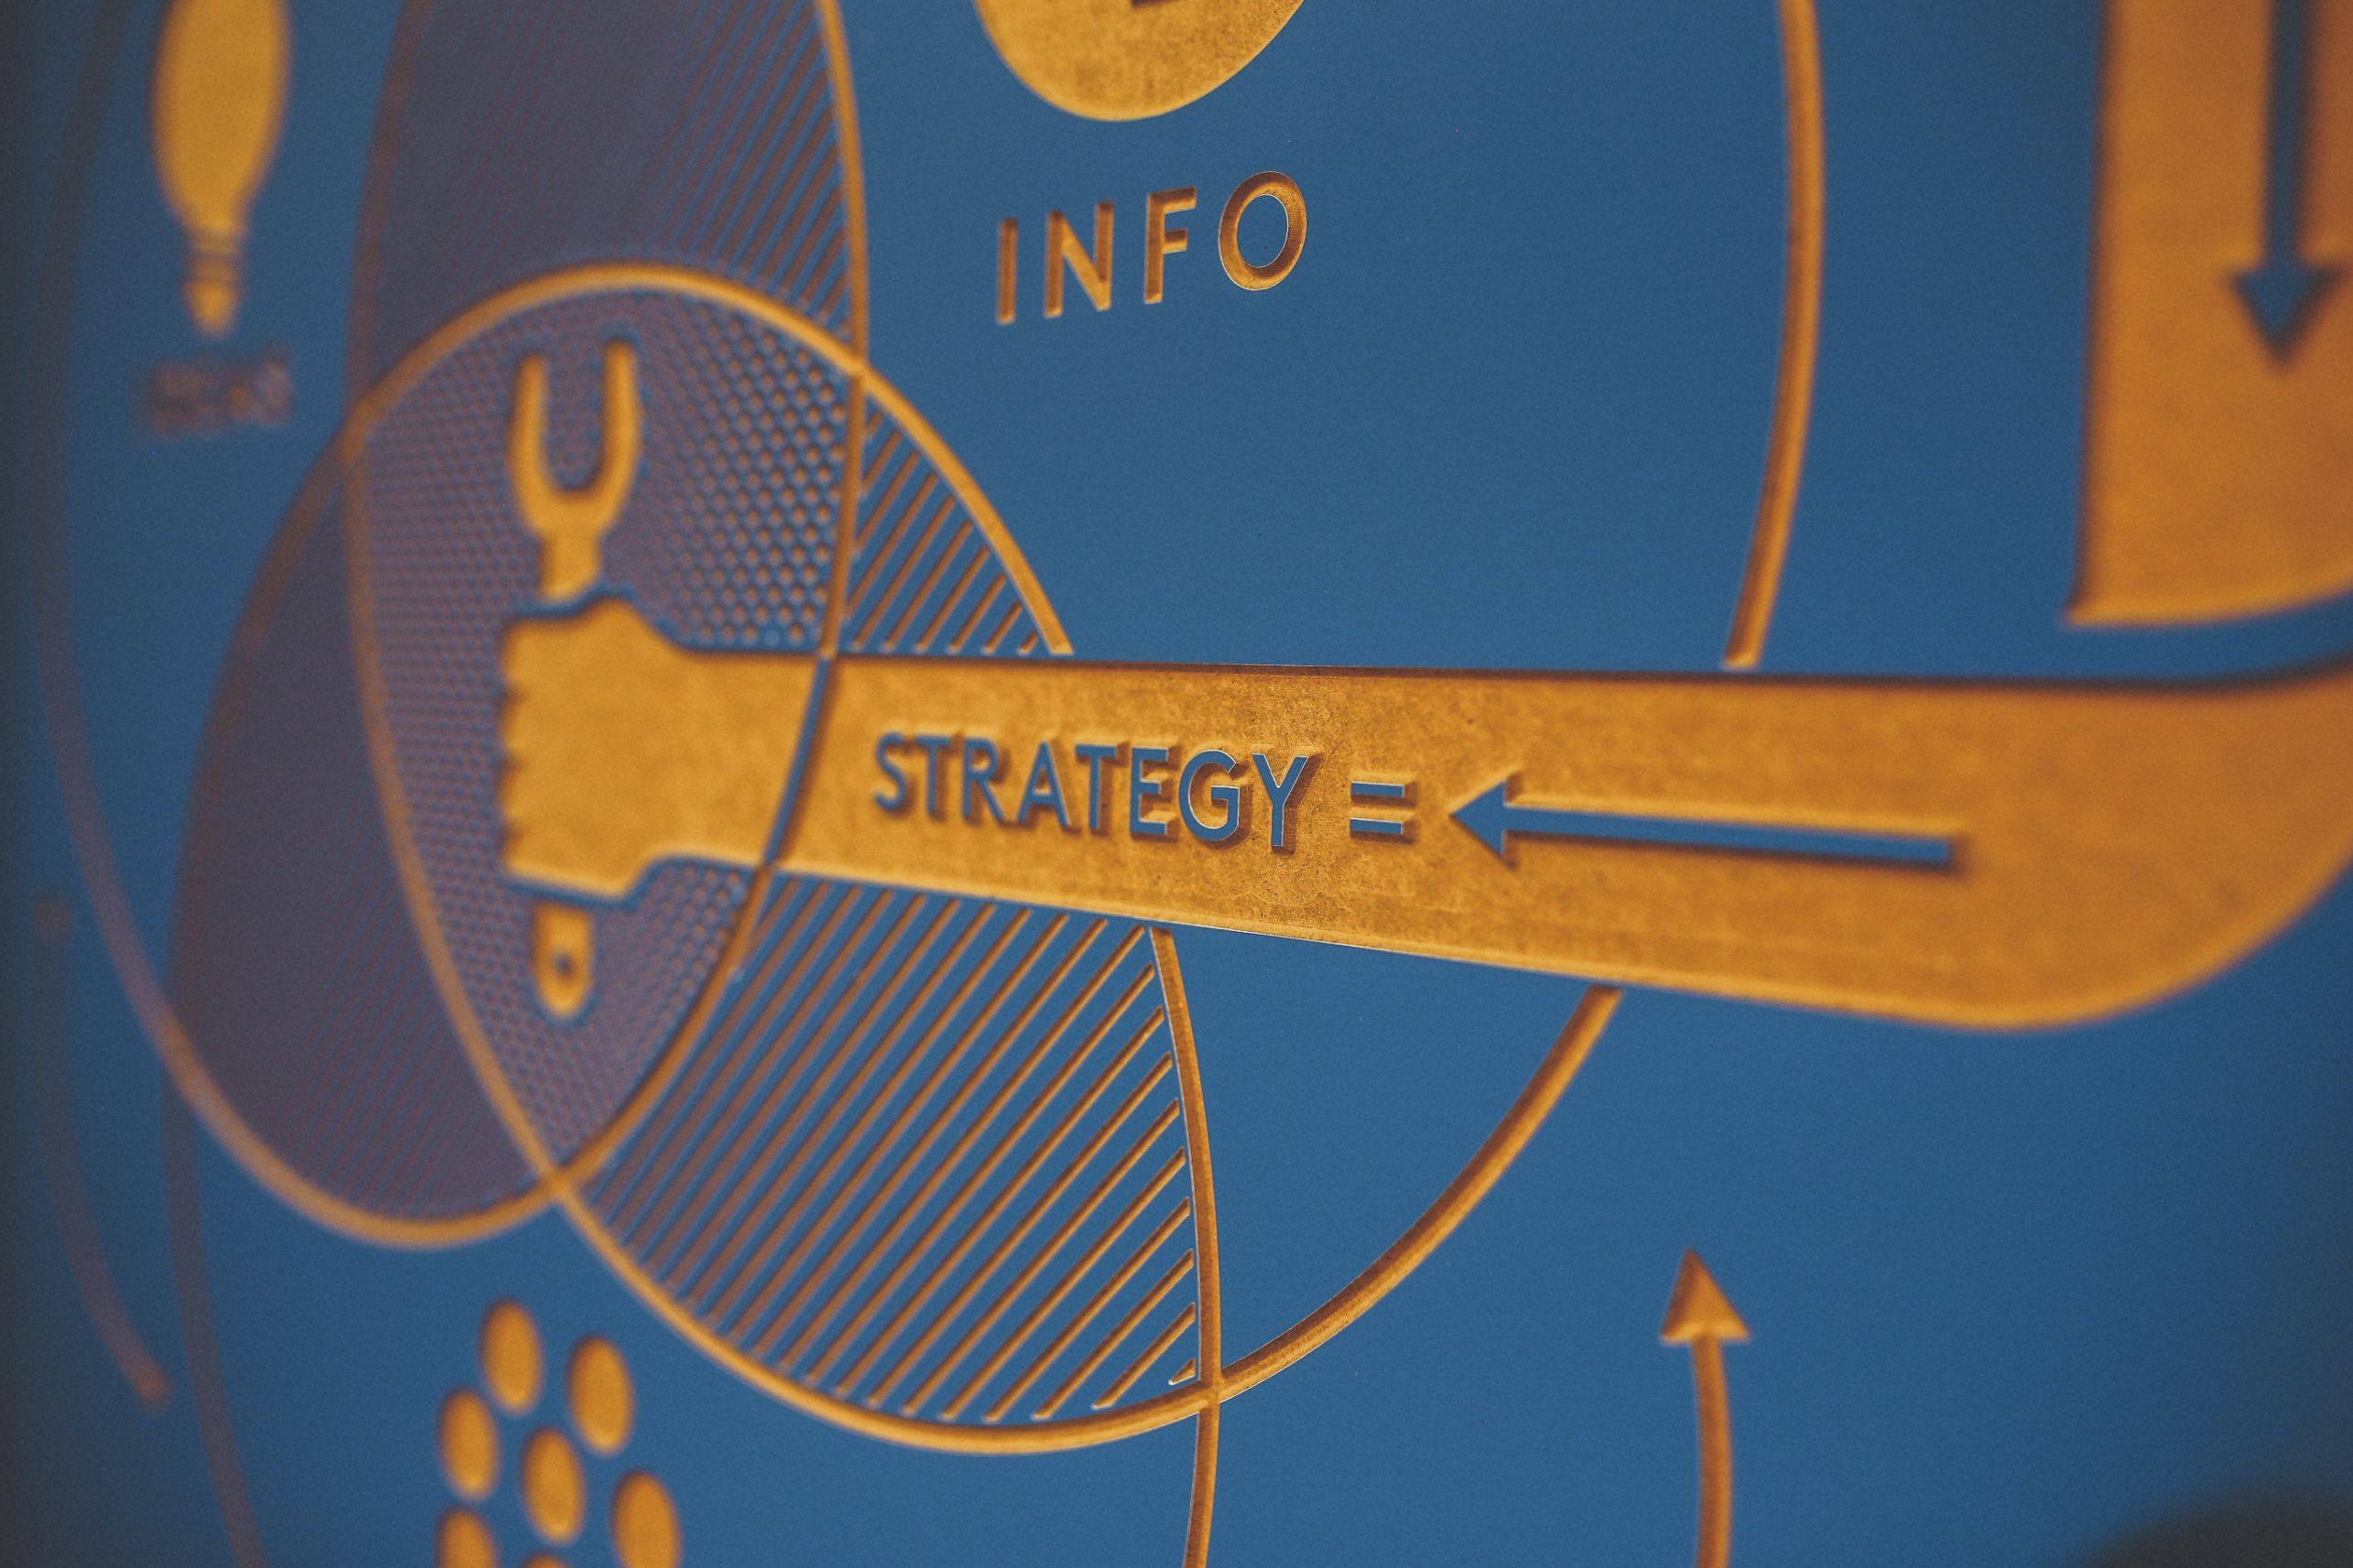 Hand holting a tool with text "strategy"